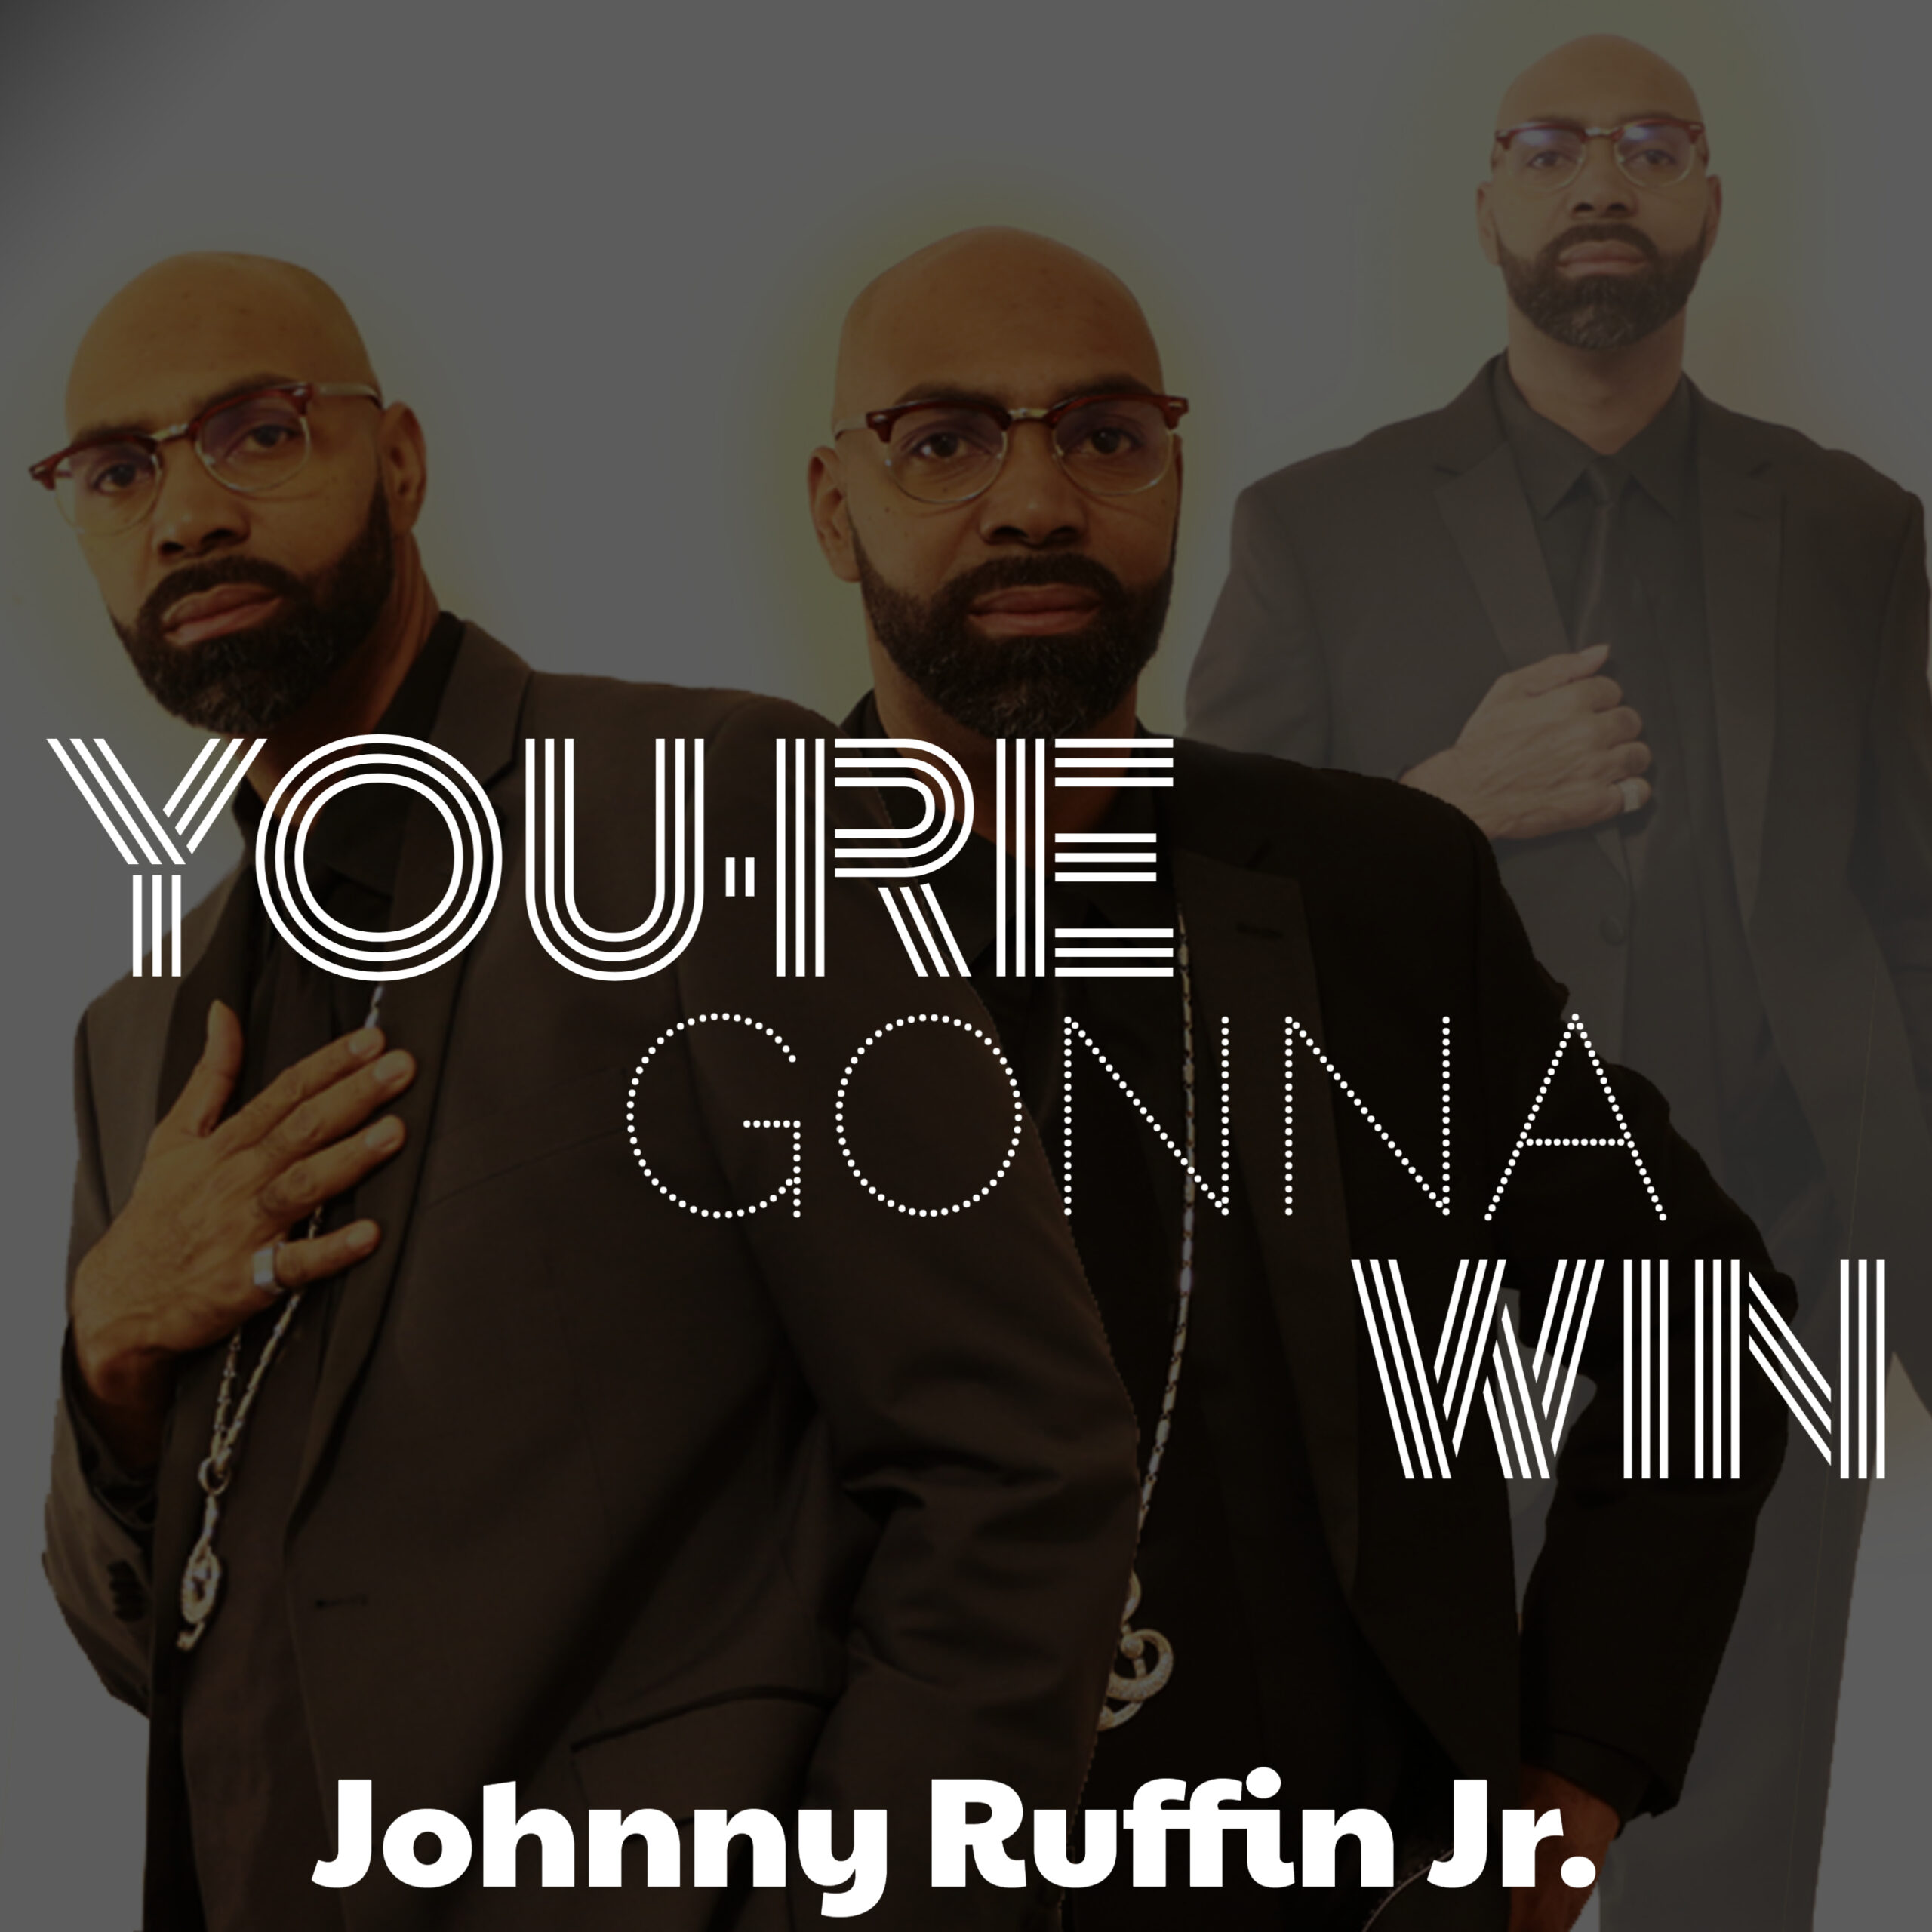 This is the art work for the single "You're Gonna Win" by Johnny Ruffin, Jr.